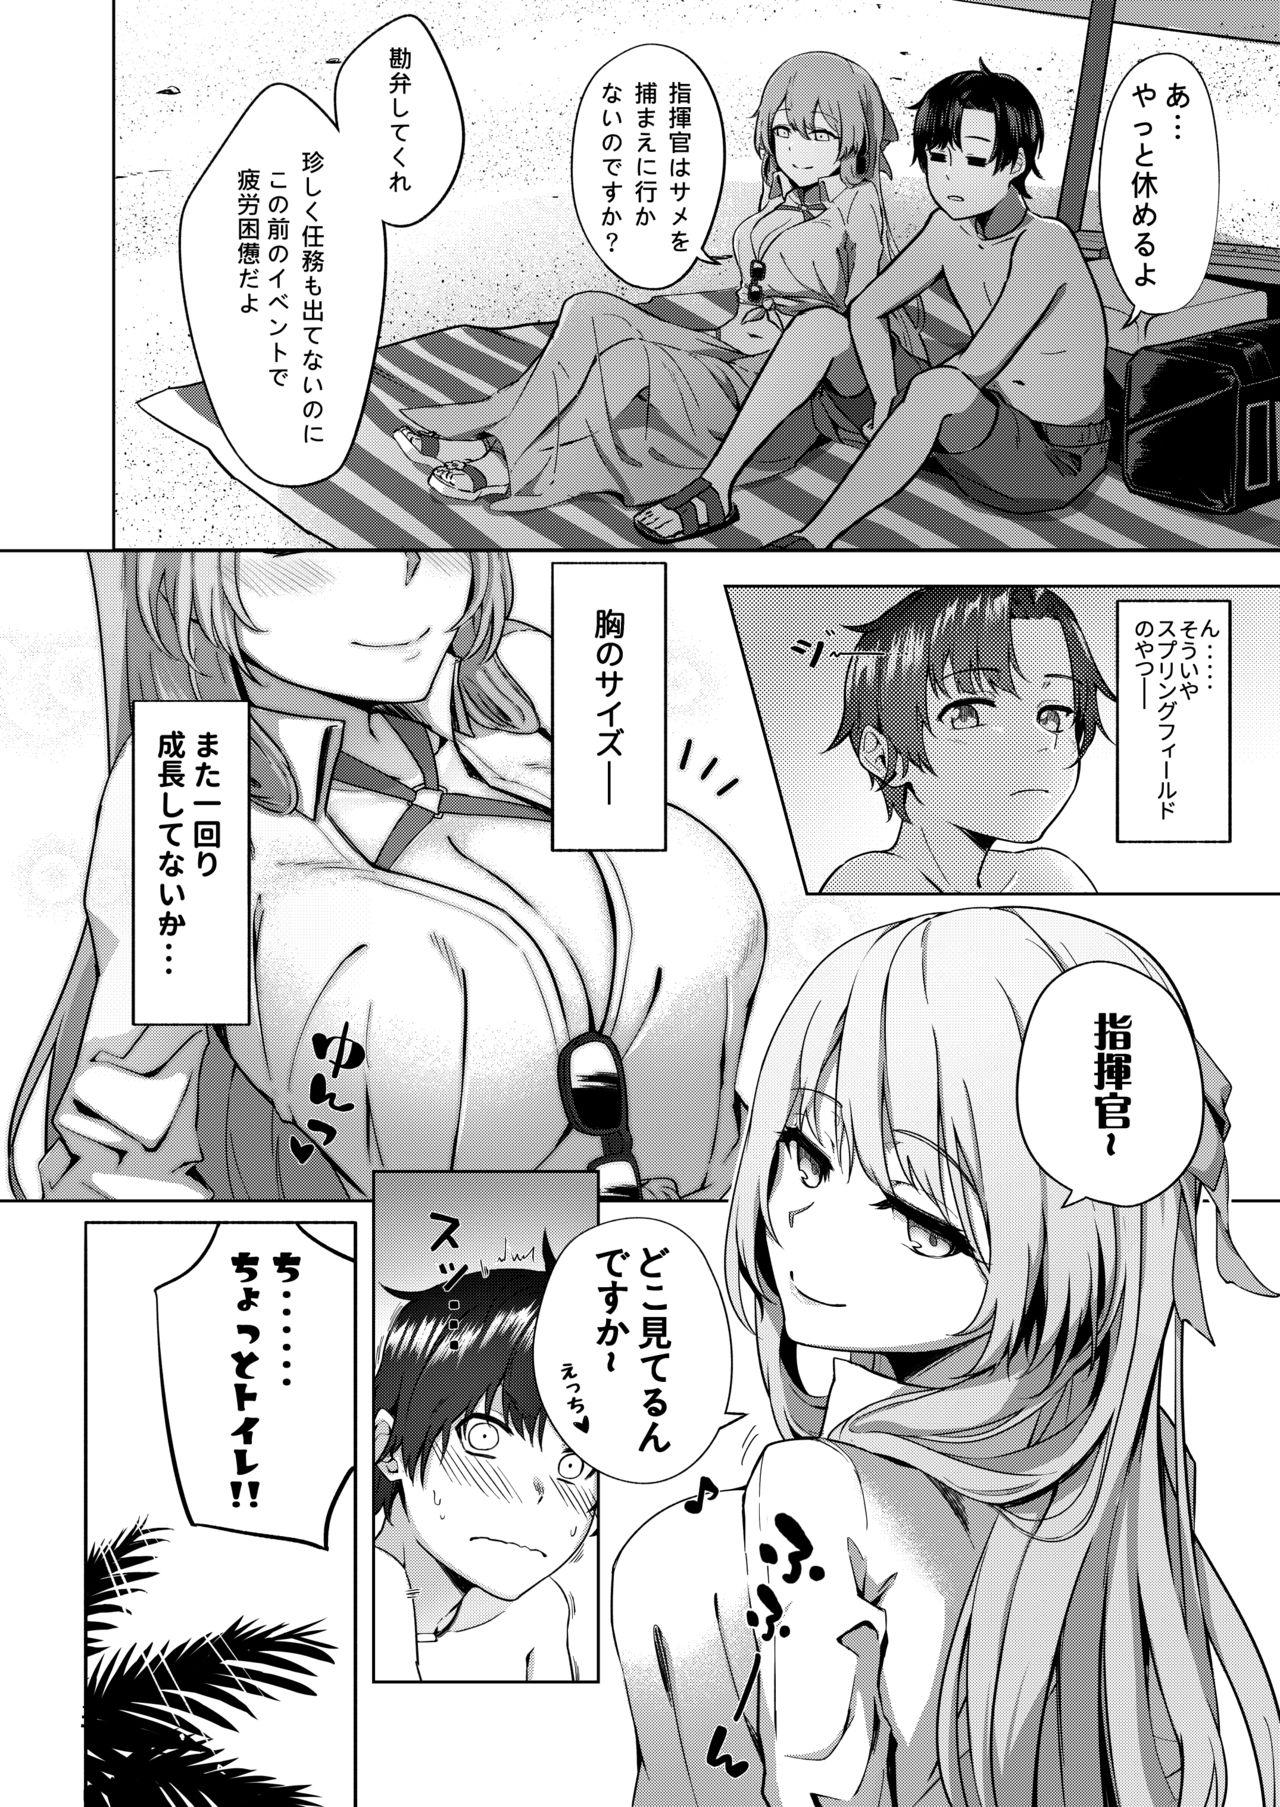 Viet Field on Fire - Girls frontline Gay Spank - Page 4